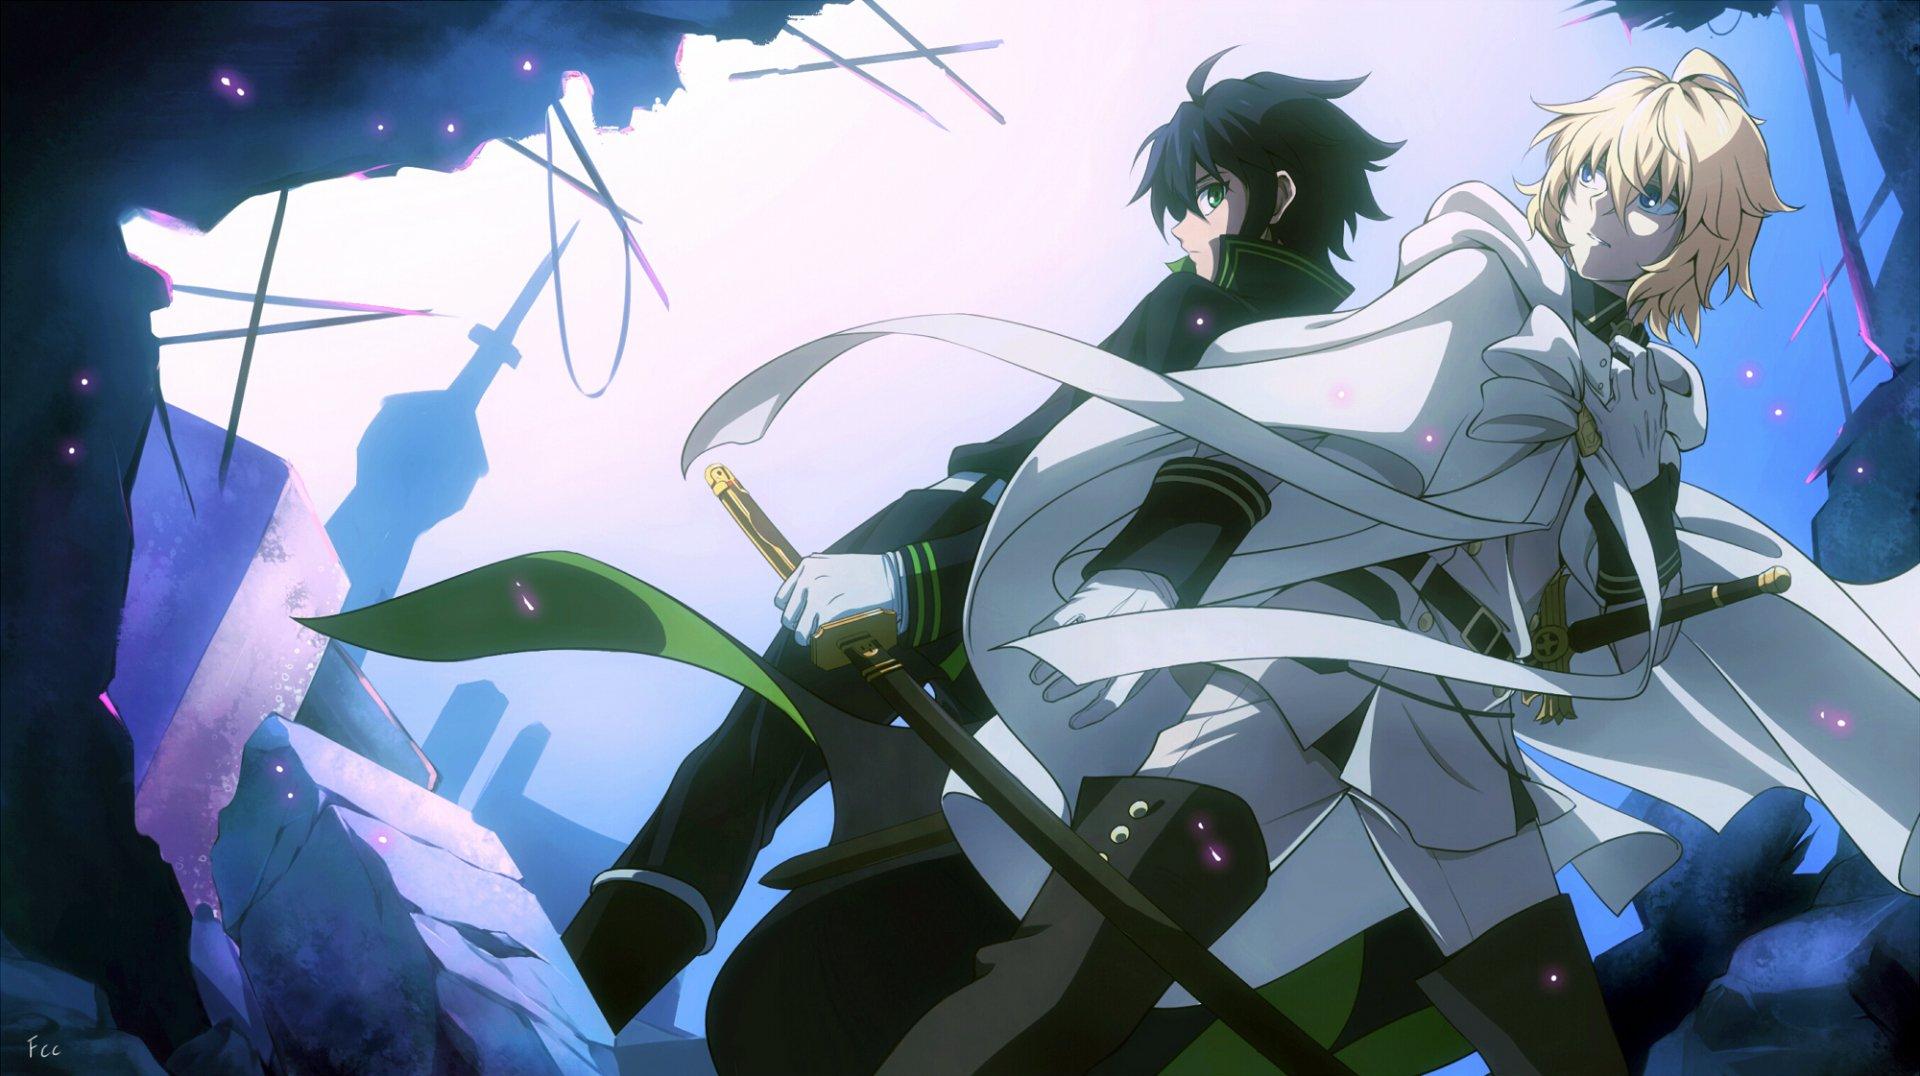 Seraph Of The End HD Wallpaper By Fcc